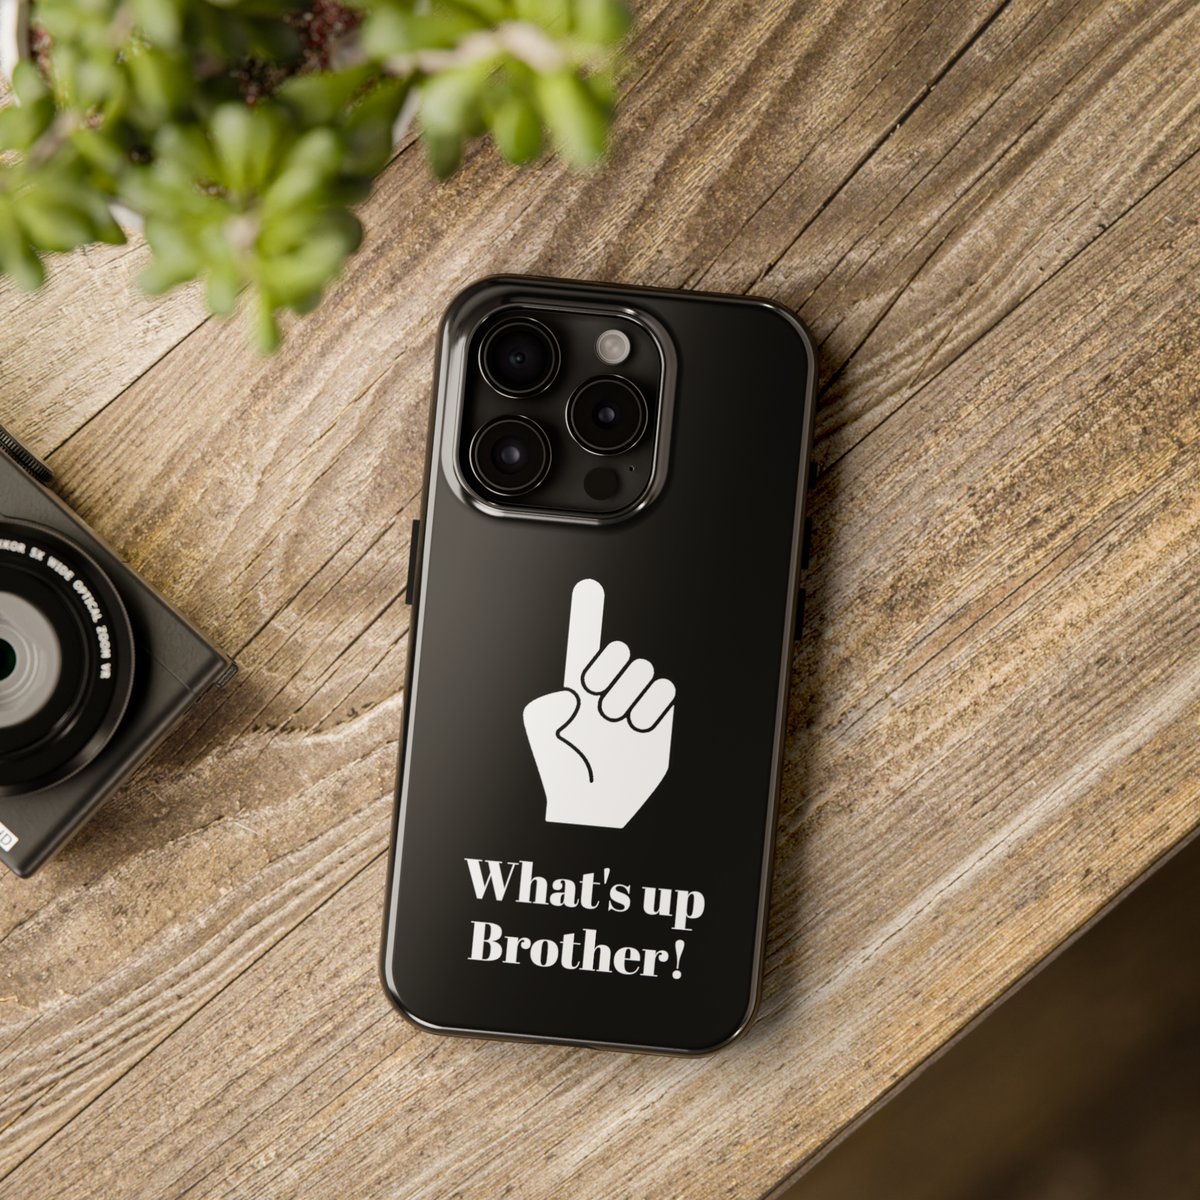 Whats up Brother phone case for iPhone 15 Pro Max, 14 Plus, 13, 12, 11, XR, X, XS, SE Mini 
#phonecase #iphonecase #aestheticphonecase #aesthetic #iphone11 #iphone12 #iphone13 #iphone14 #iphone15 #iphone16 
#iphone11case #iphone12case #iphone13case #iphone14case #whatsupbrother